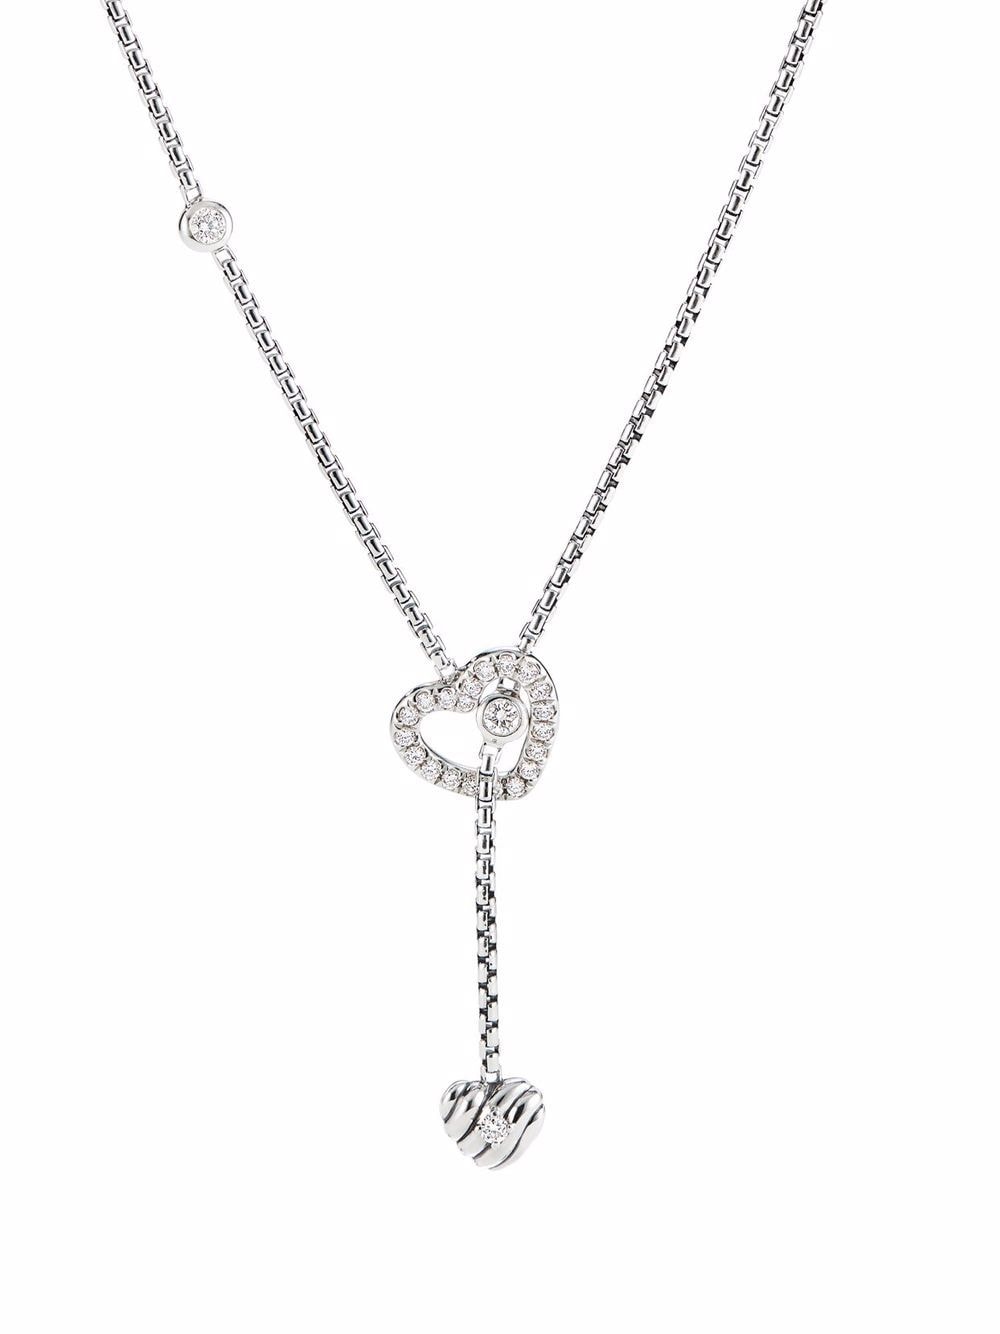 sterling silver Cable Collectibles Heart Y diamond necklace